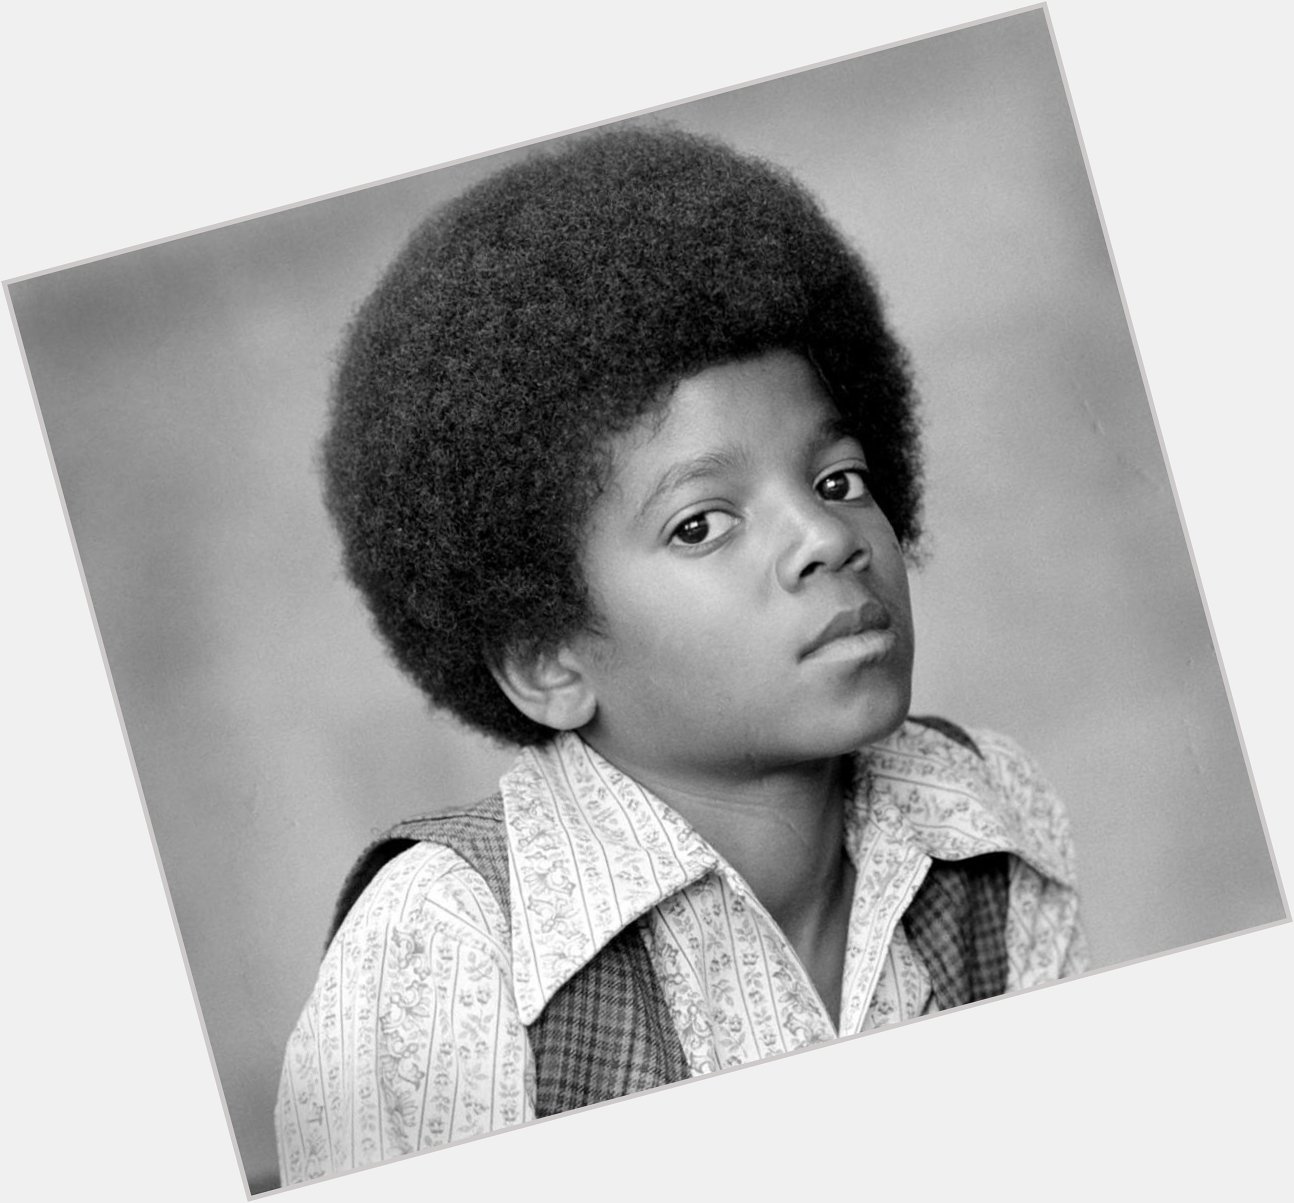 Happy birthday to the GOAT, the King of Pop, Michael Jackson 
RIP  